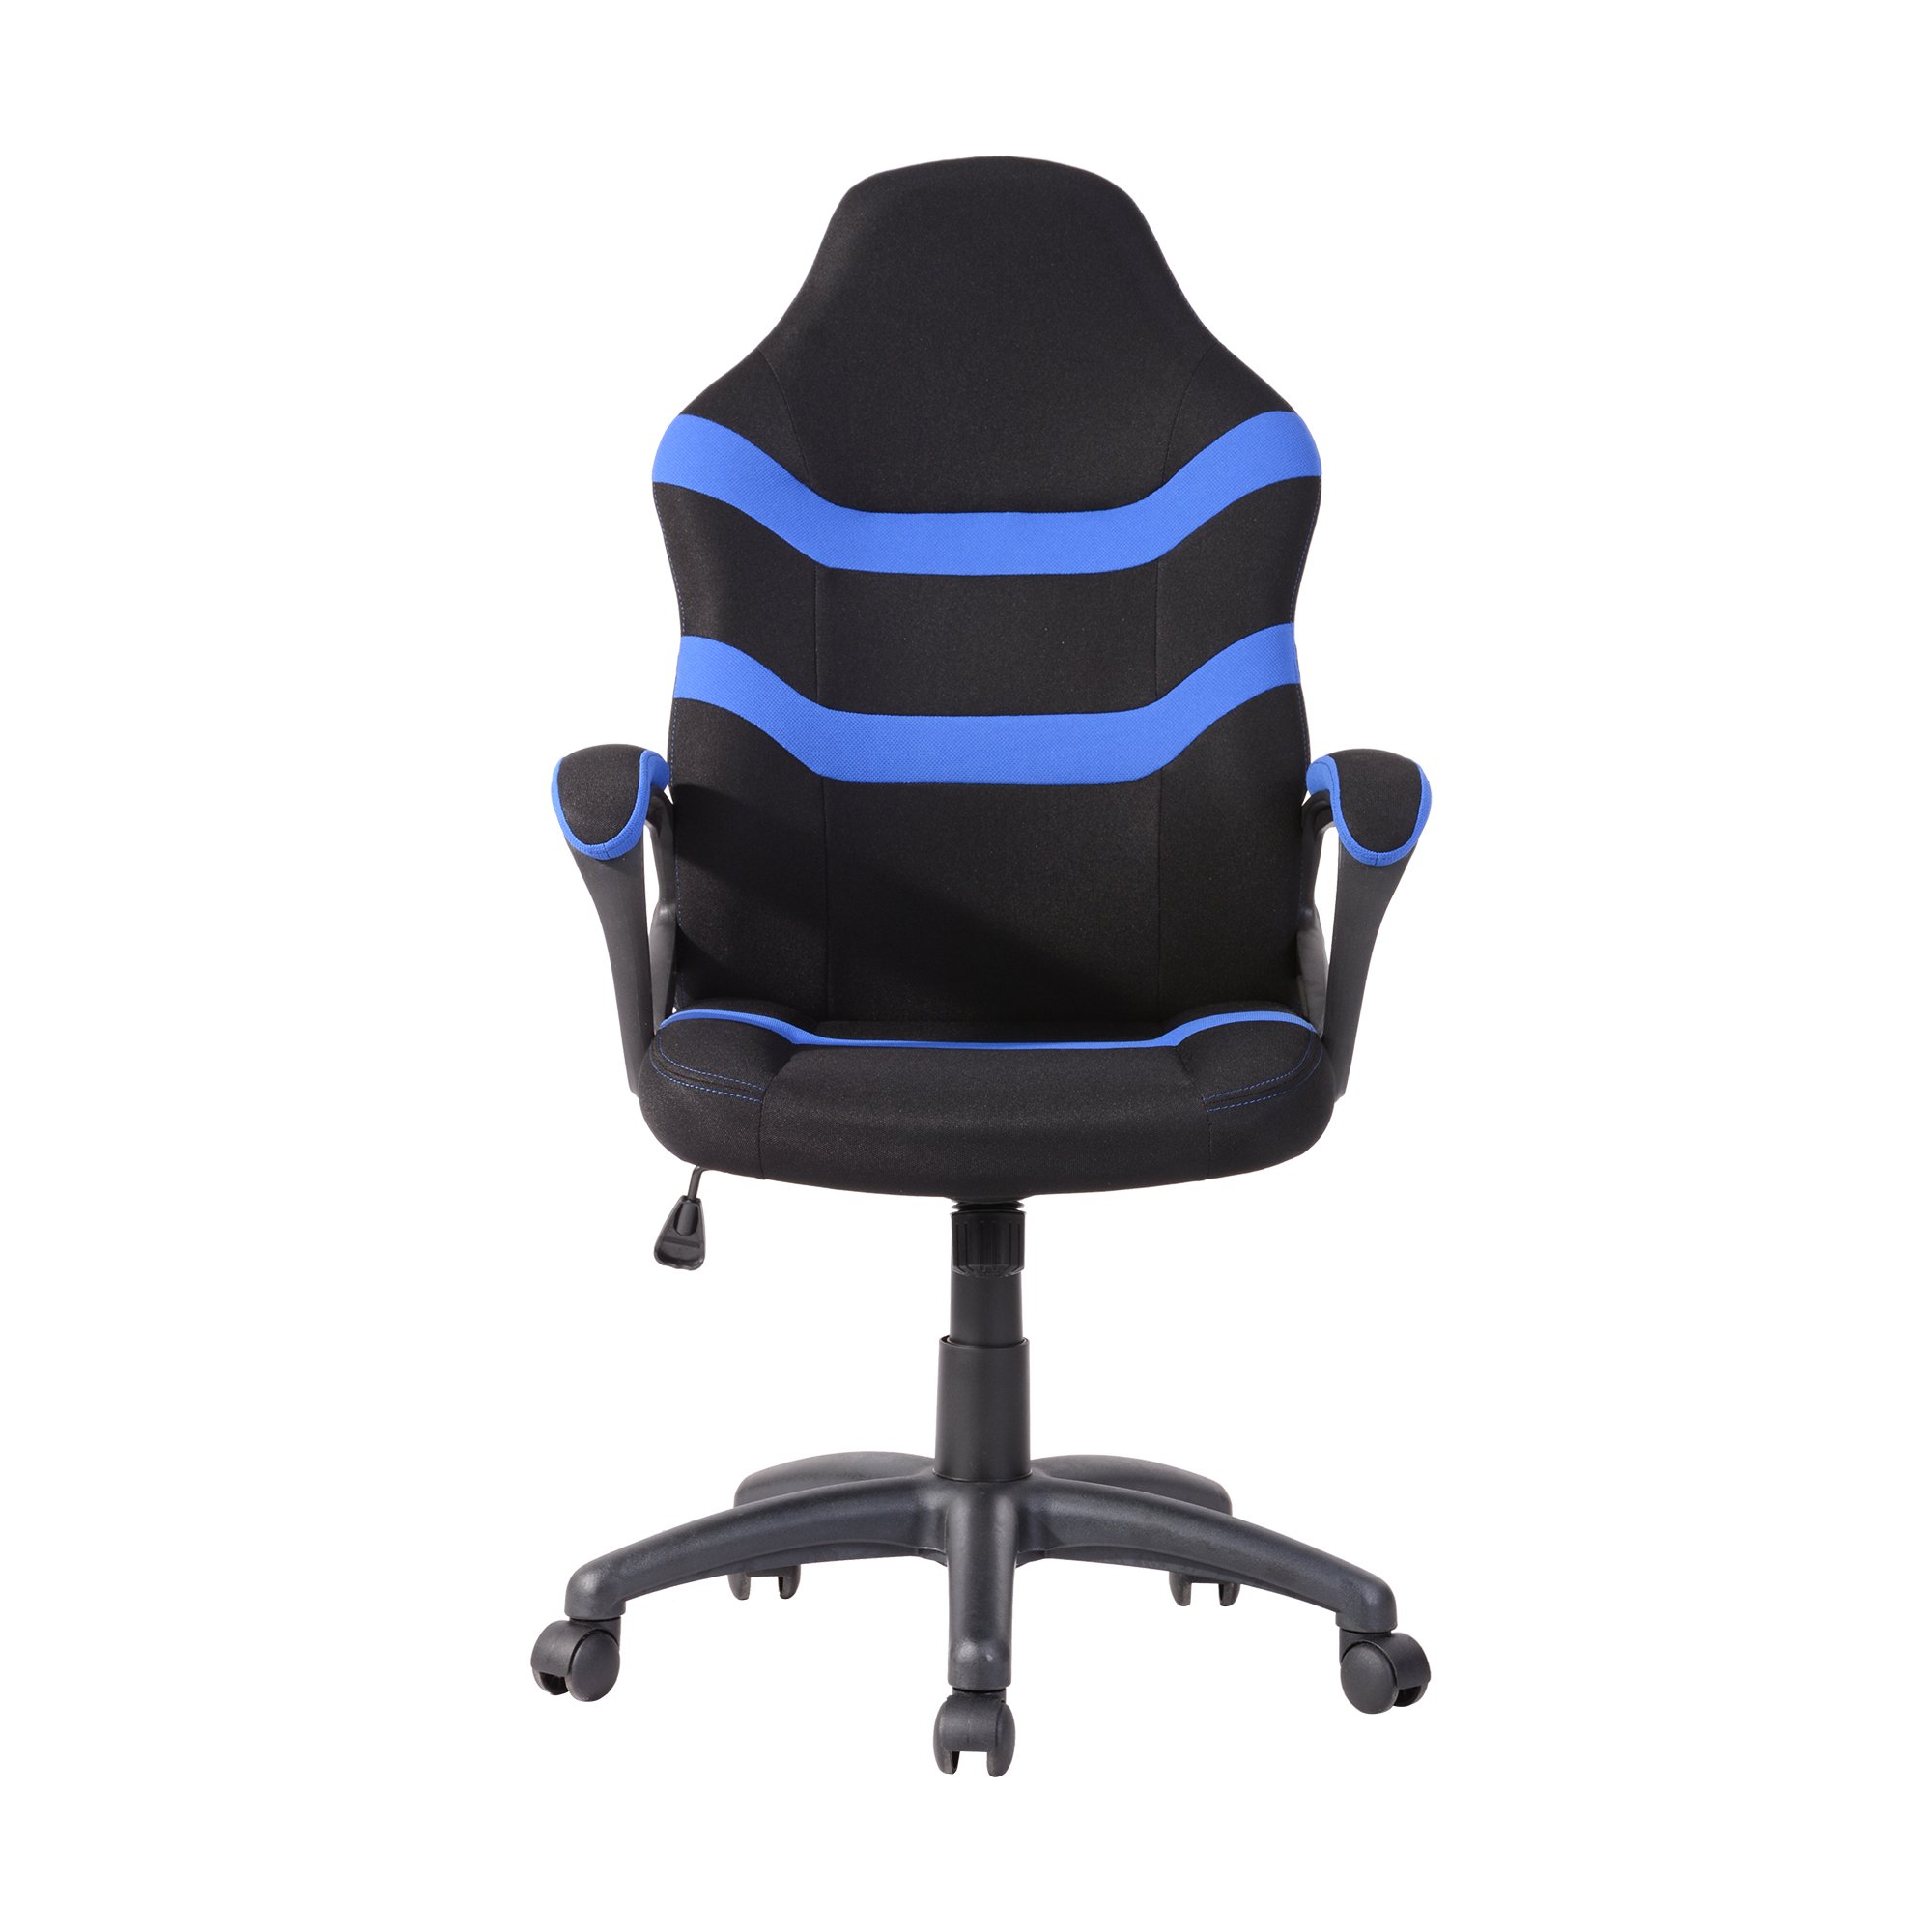 Ergonomic Height-Adjustable Office Gaming Chair with Breathable Fabric for Office, Study-room-CASAINC